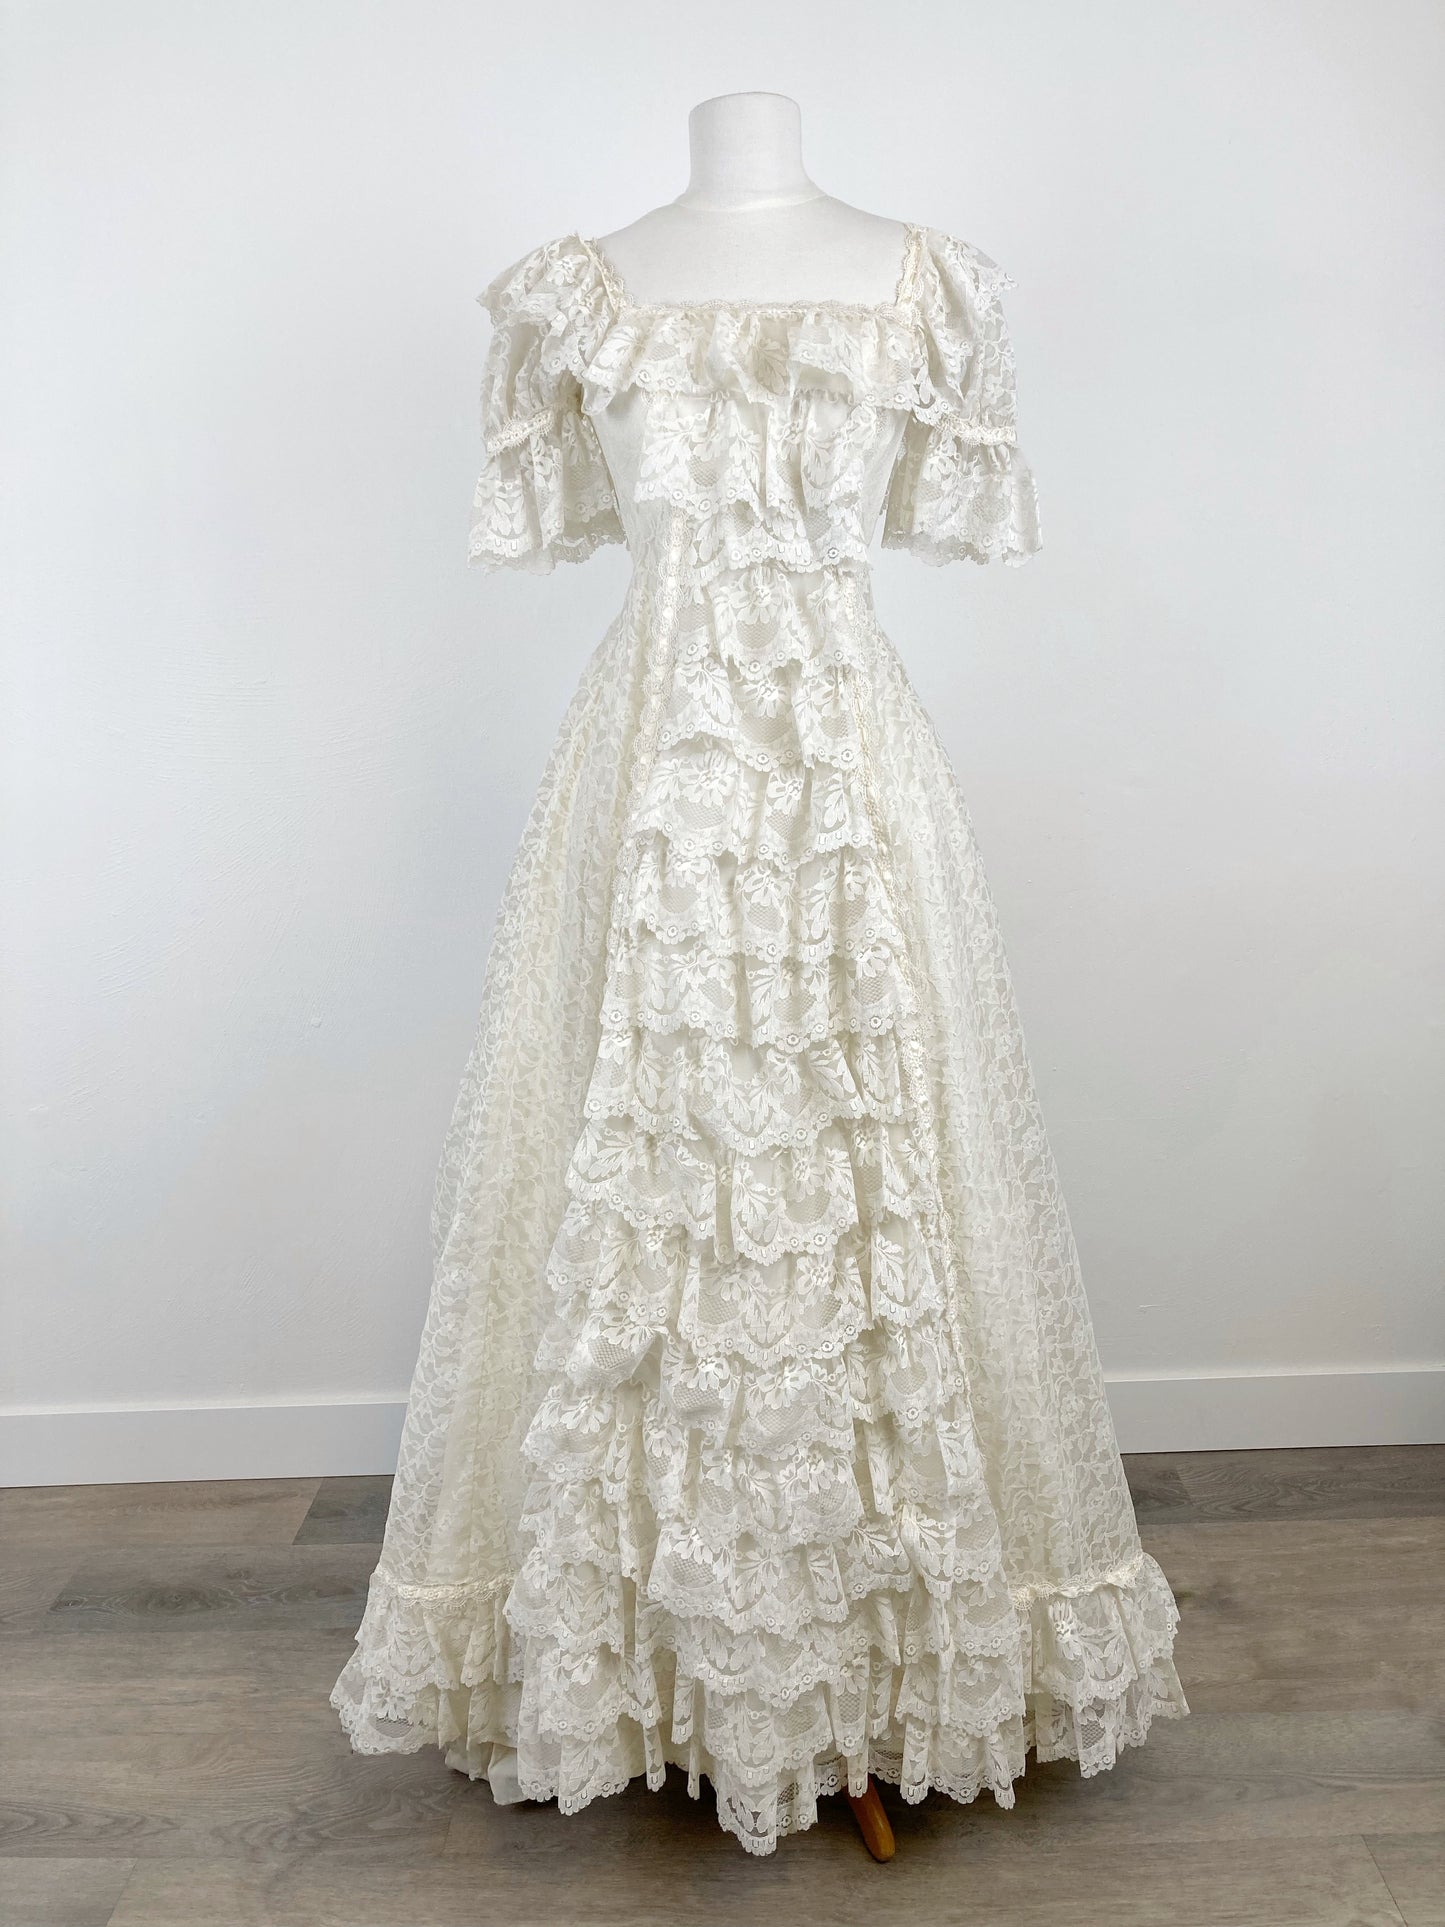 Romantic 1970s Lacey Regency Style Bridal Gown, "Charlotte"